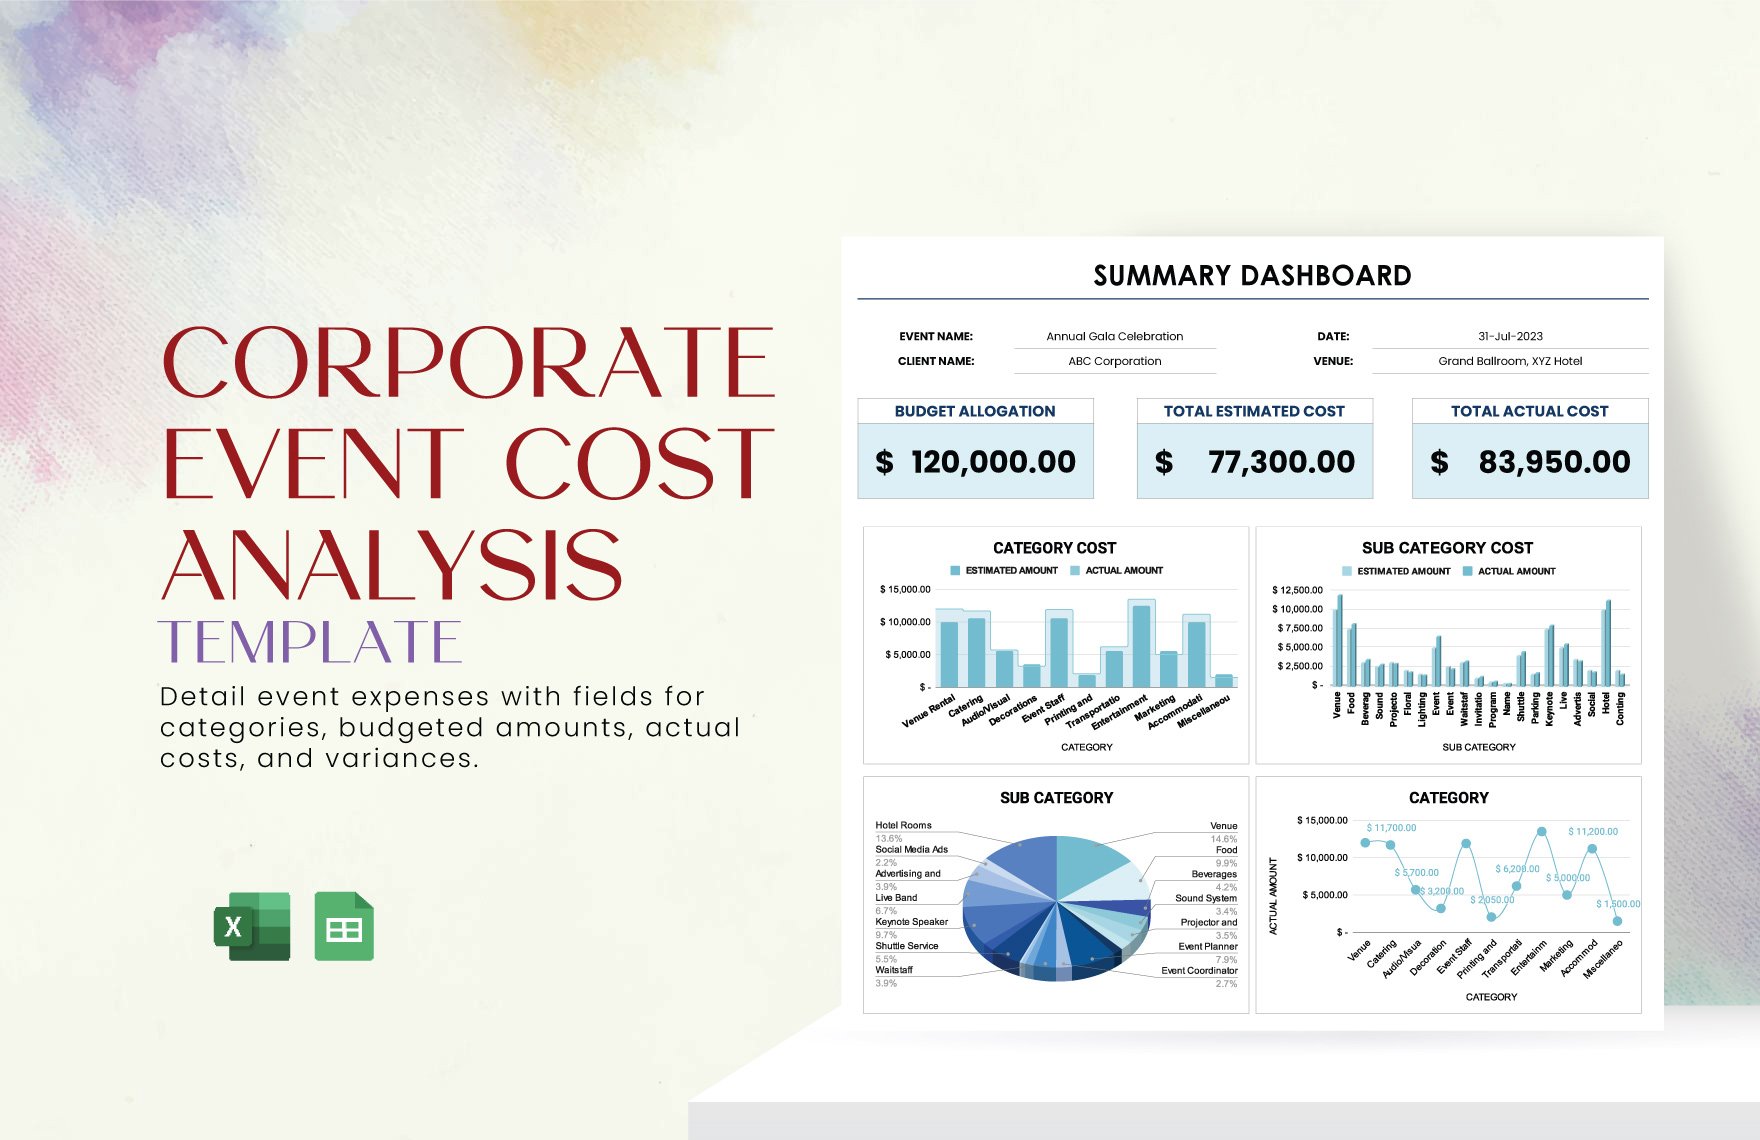 Corporate Event Cost Analysis Template in Excel, Google Sheets